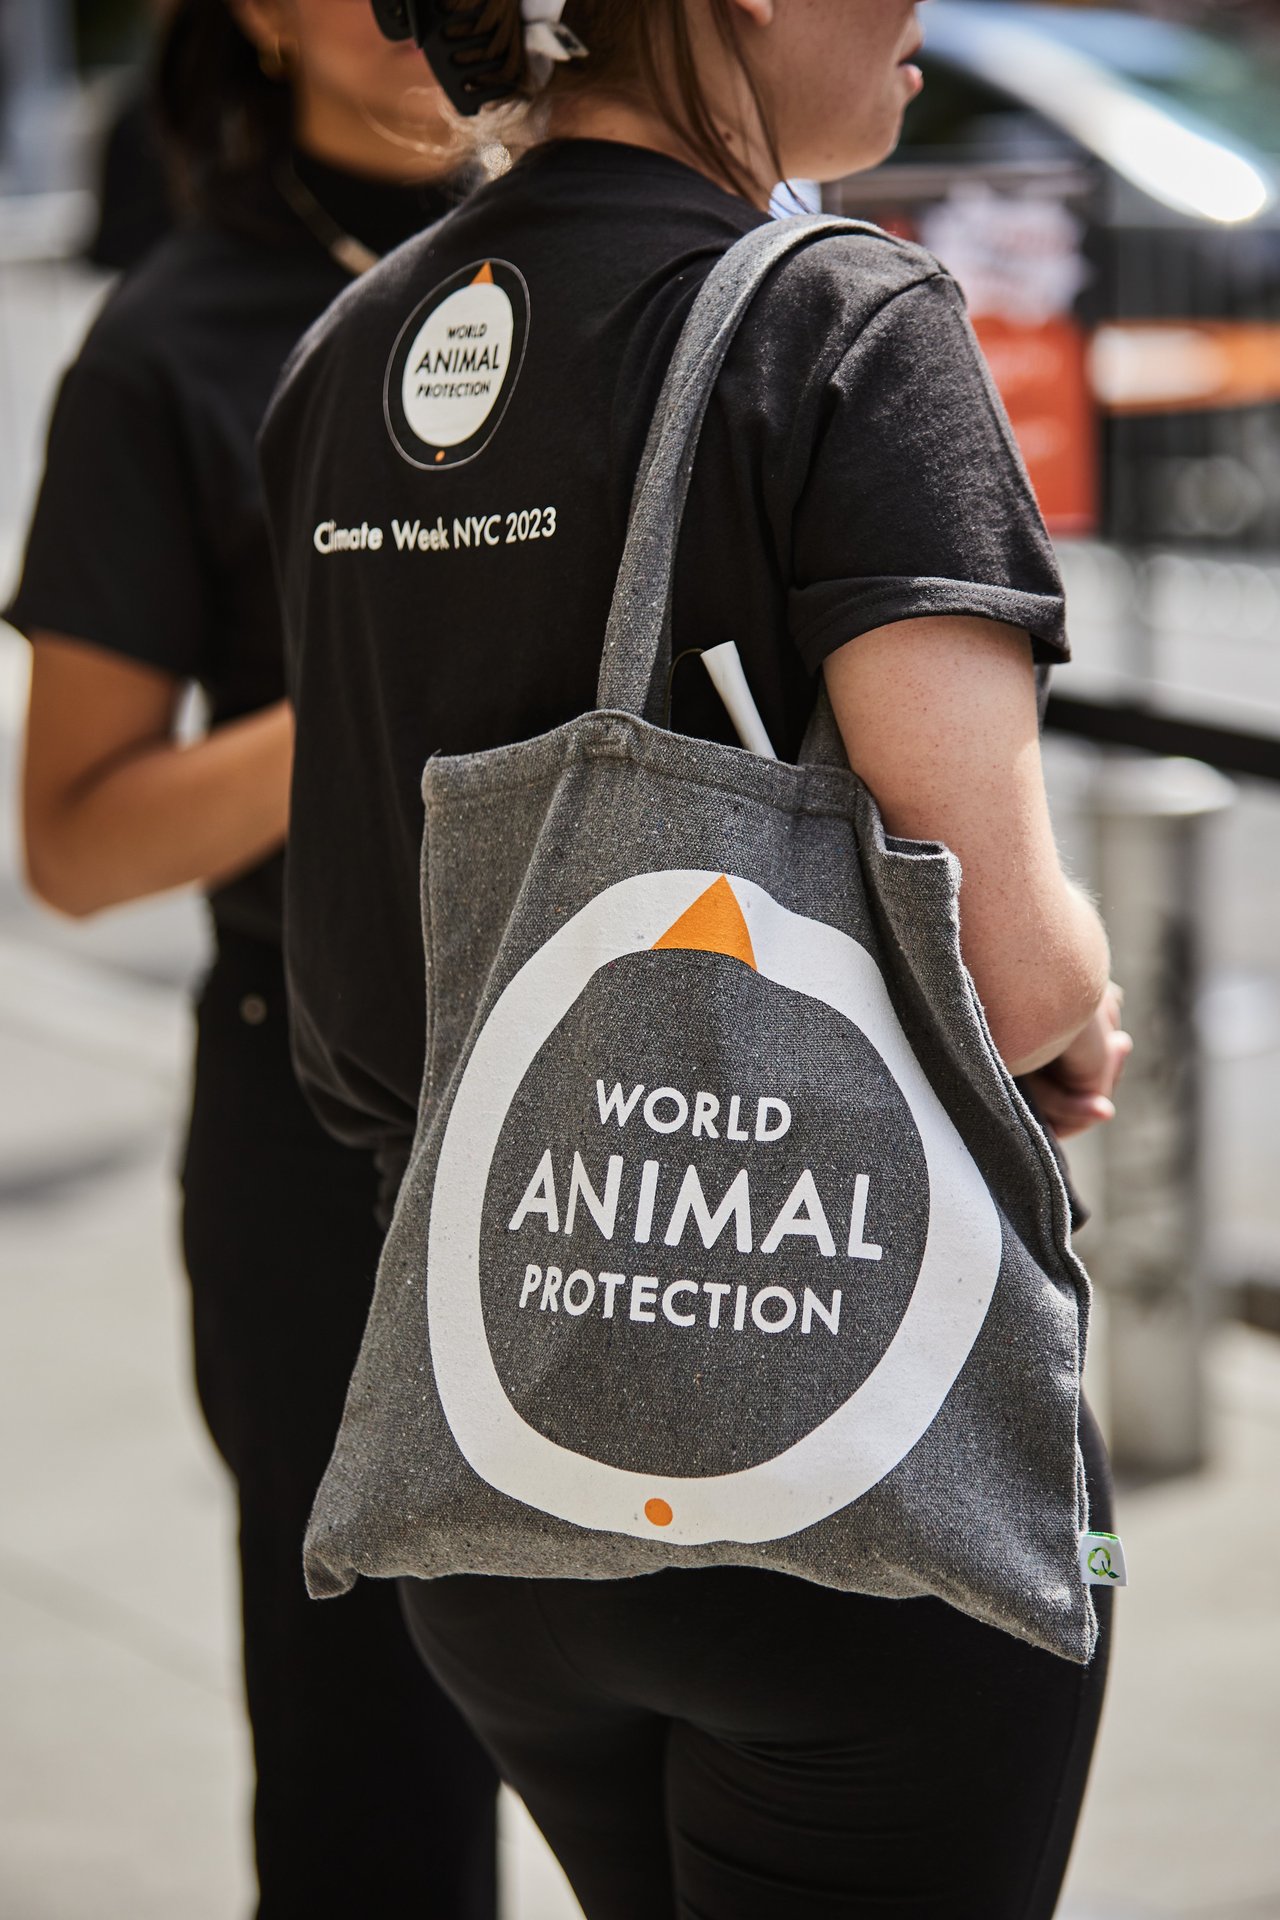 A World Animal Protection employee wearing World Animal Protection merchandise.